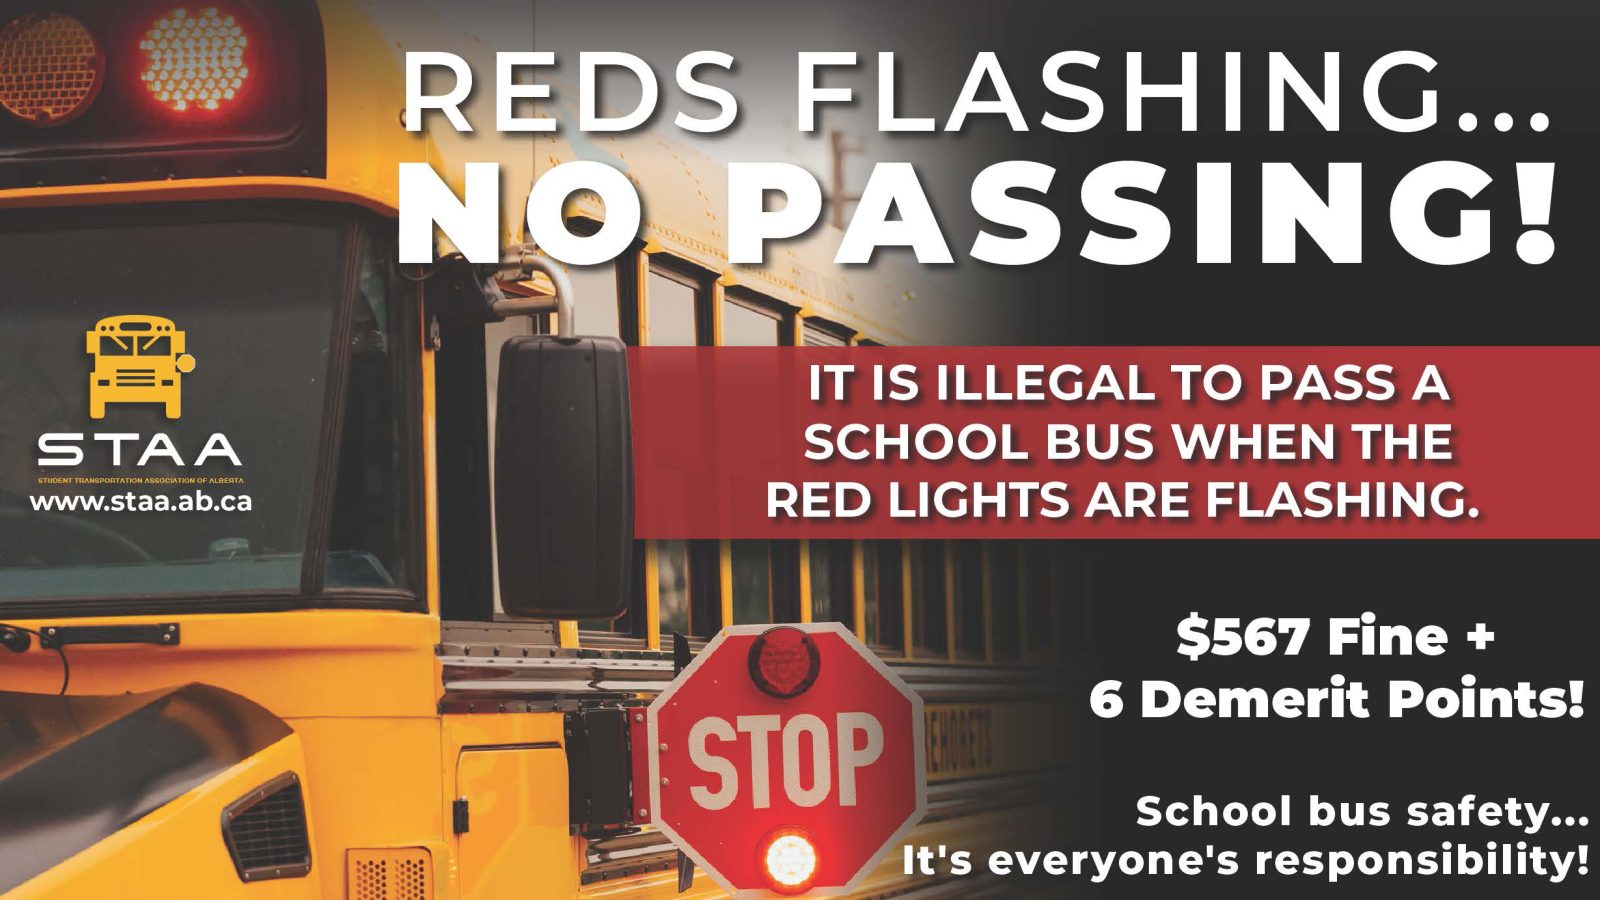 No passing when school bus red lights are flashing!